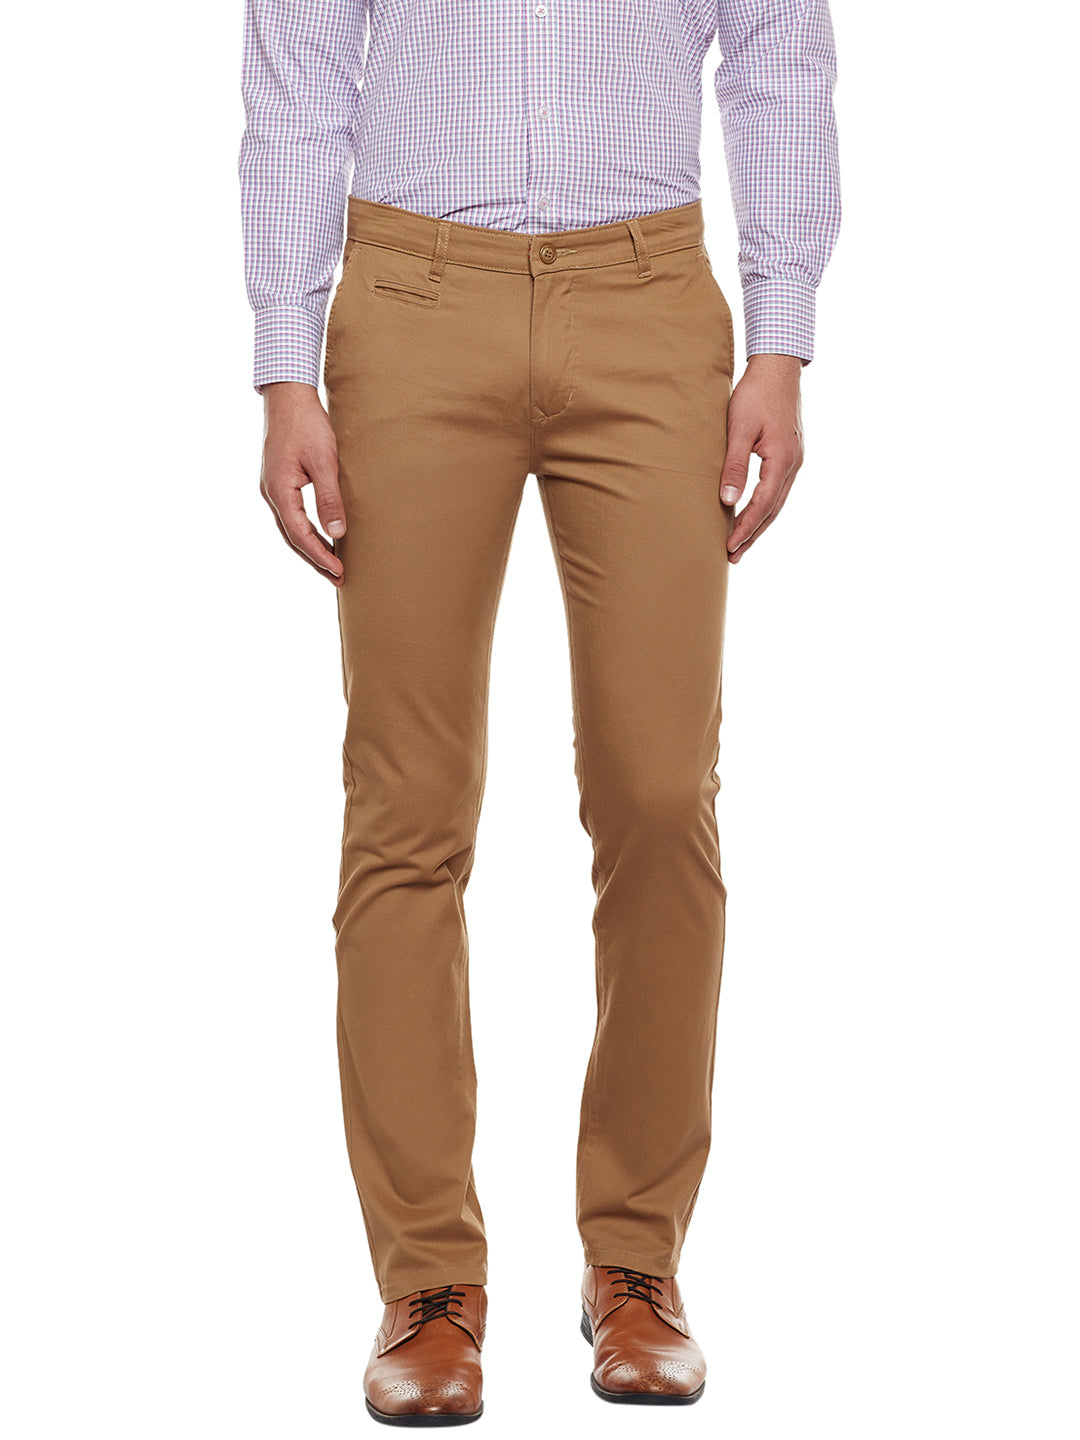 Men Brown Solid Slim Fit Casual Stretchable Chinos Trouser